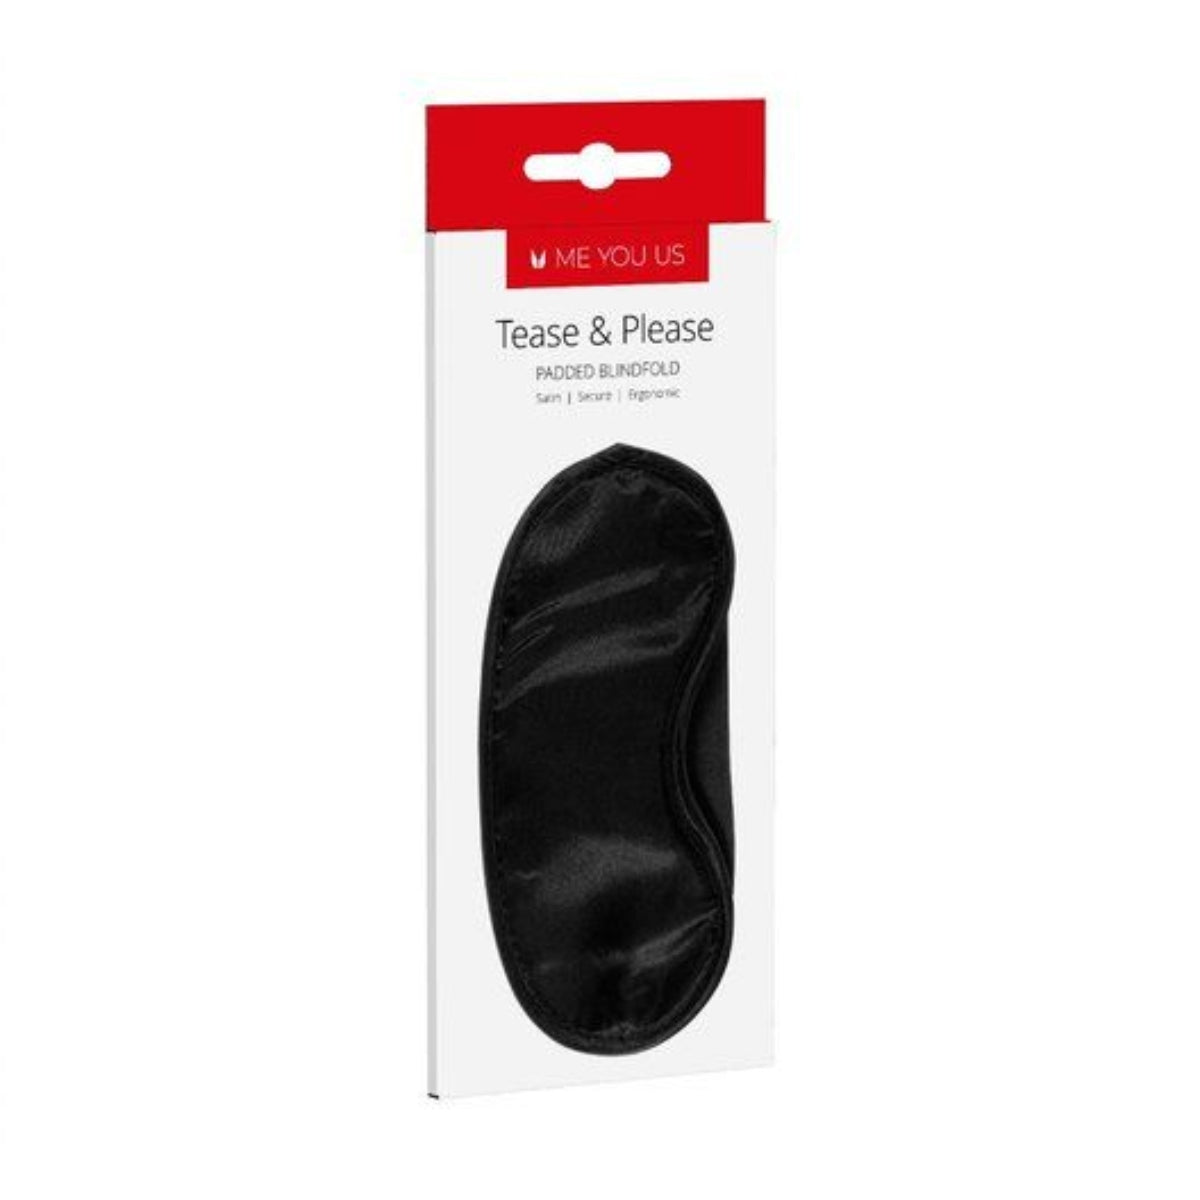 Me You Us Tease & Please Padded Blindfold Black - Simply Pleasure